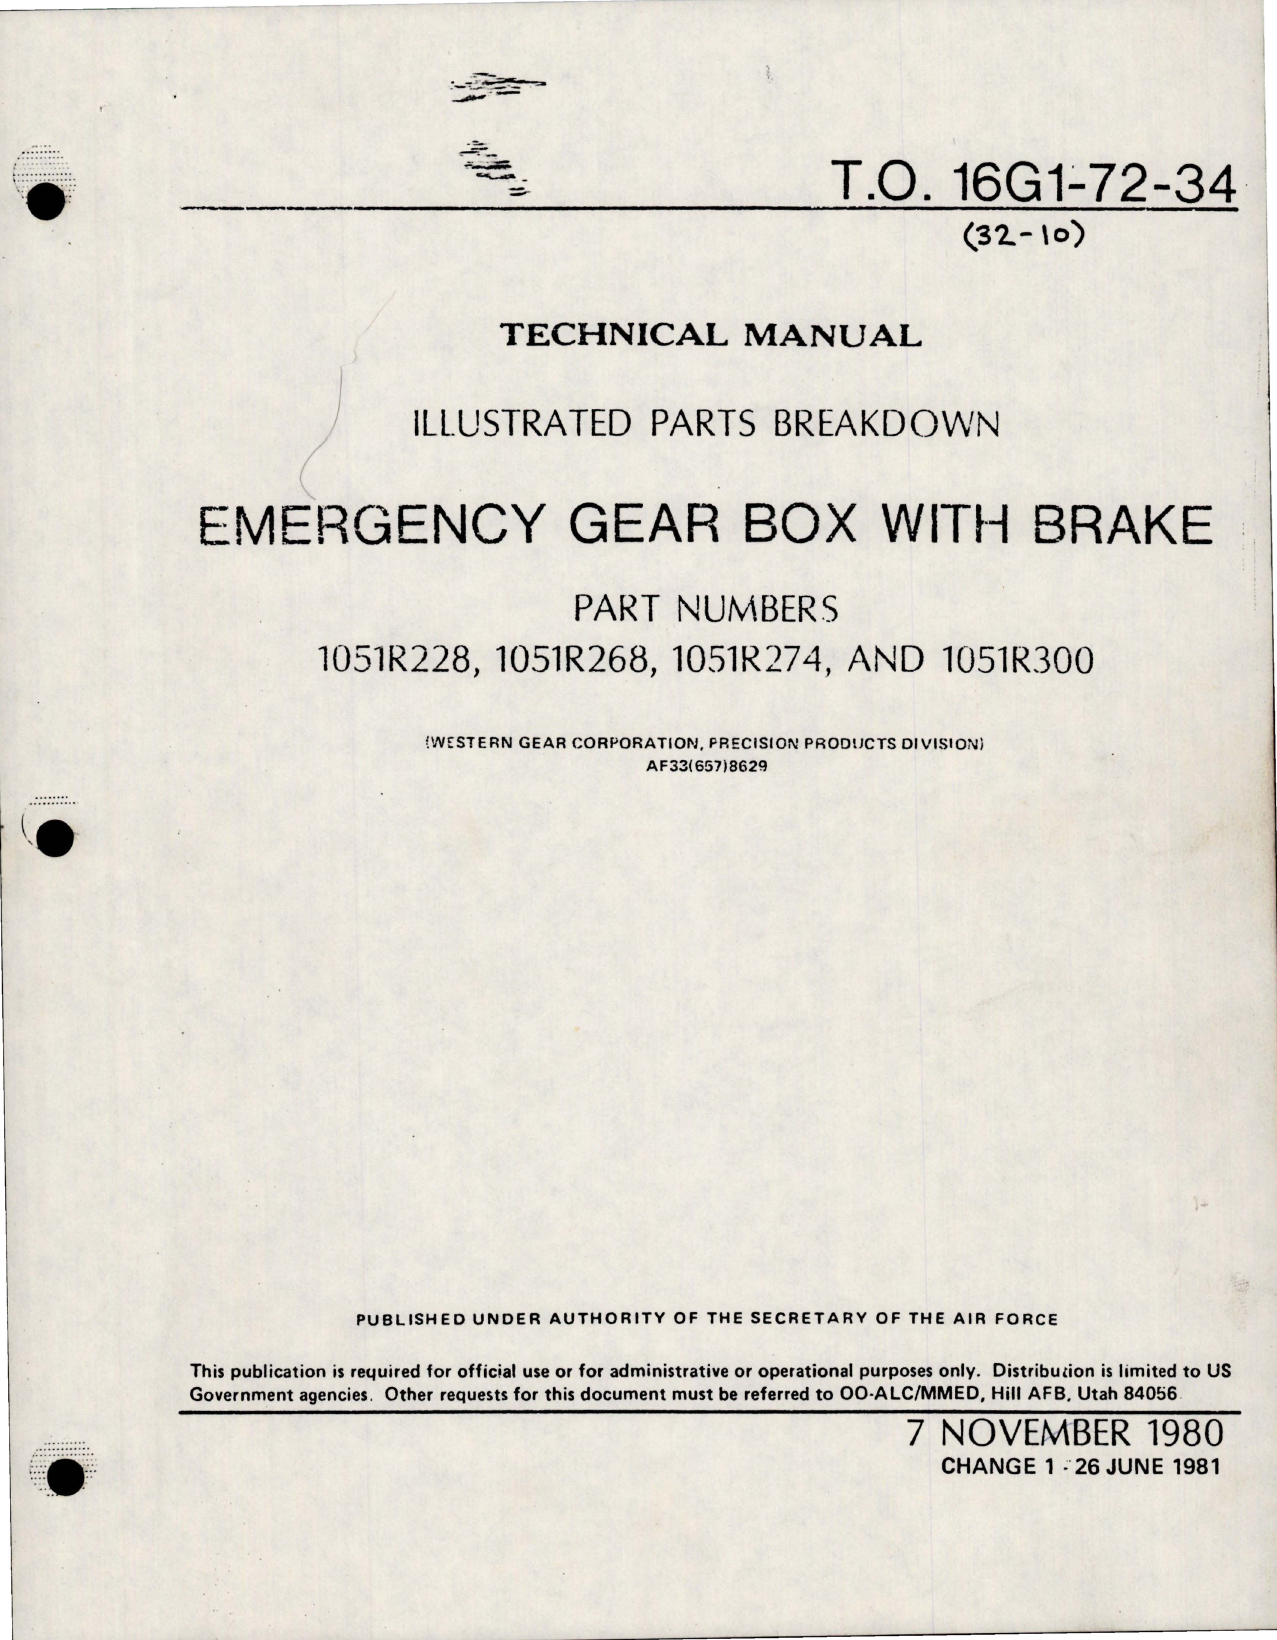 Sample page 1 from AirCorps Library document: Illustrated Parts Breakdown for Emergency Gear Box with Brake - Parts 1051R228, 1051R268, 1051R274 and 1051R300